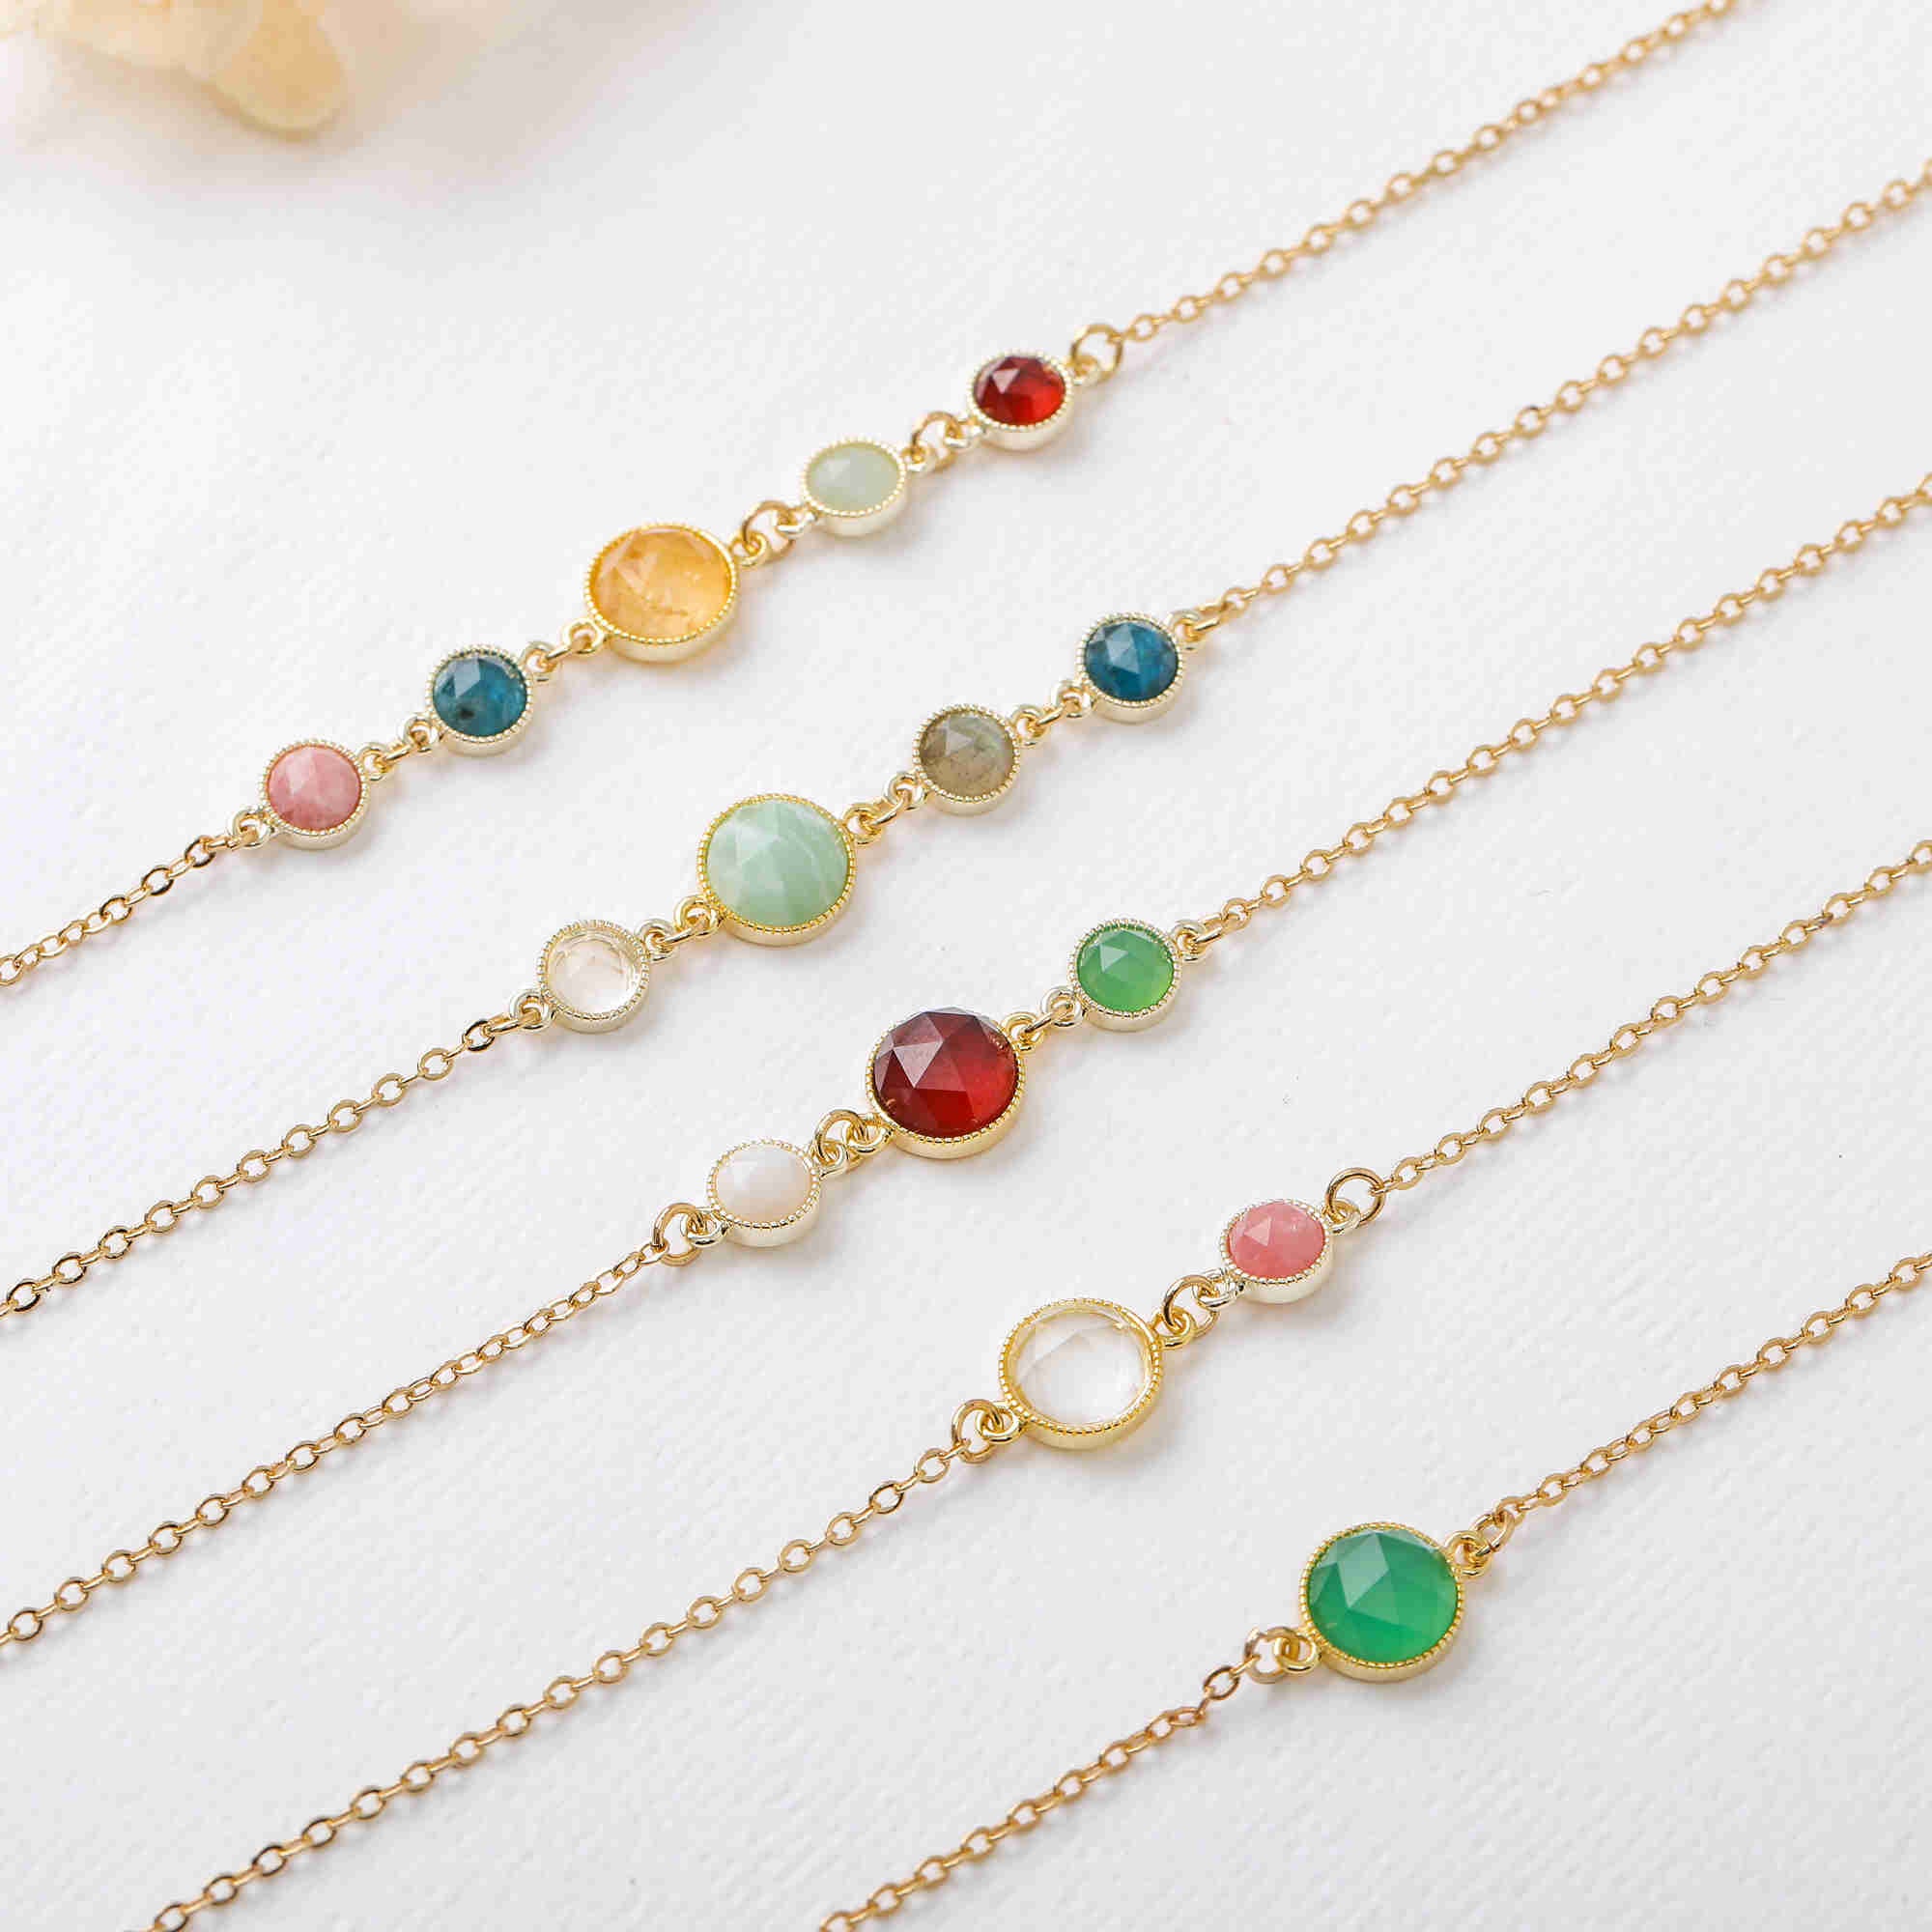 16" Round Multi Faceted Gemstone Necklace, Gold Plated Bezel, Healing Crystal Necklace, Birthstone Necklace, Wholesale Jewelry BT022